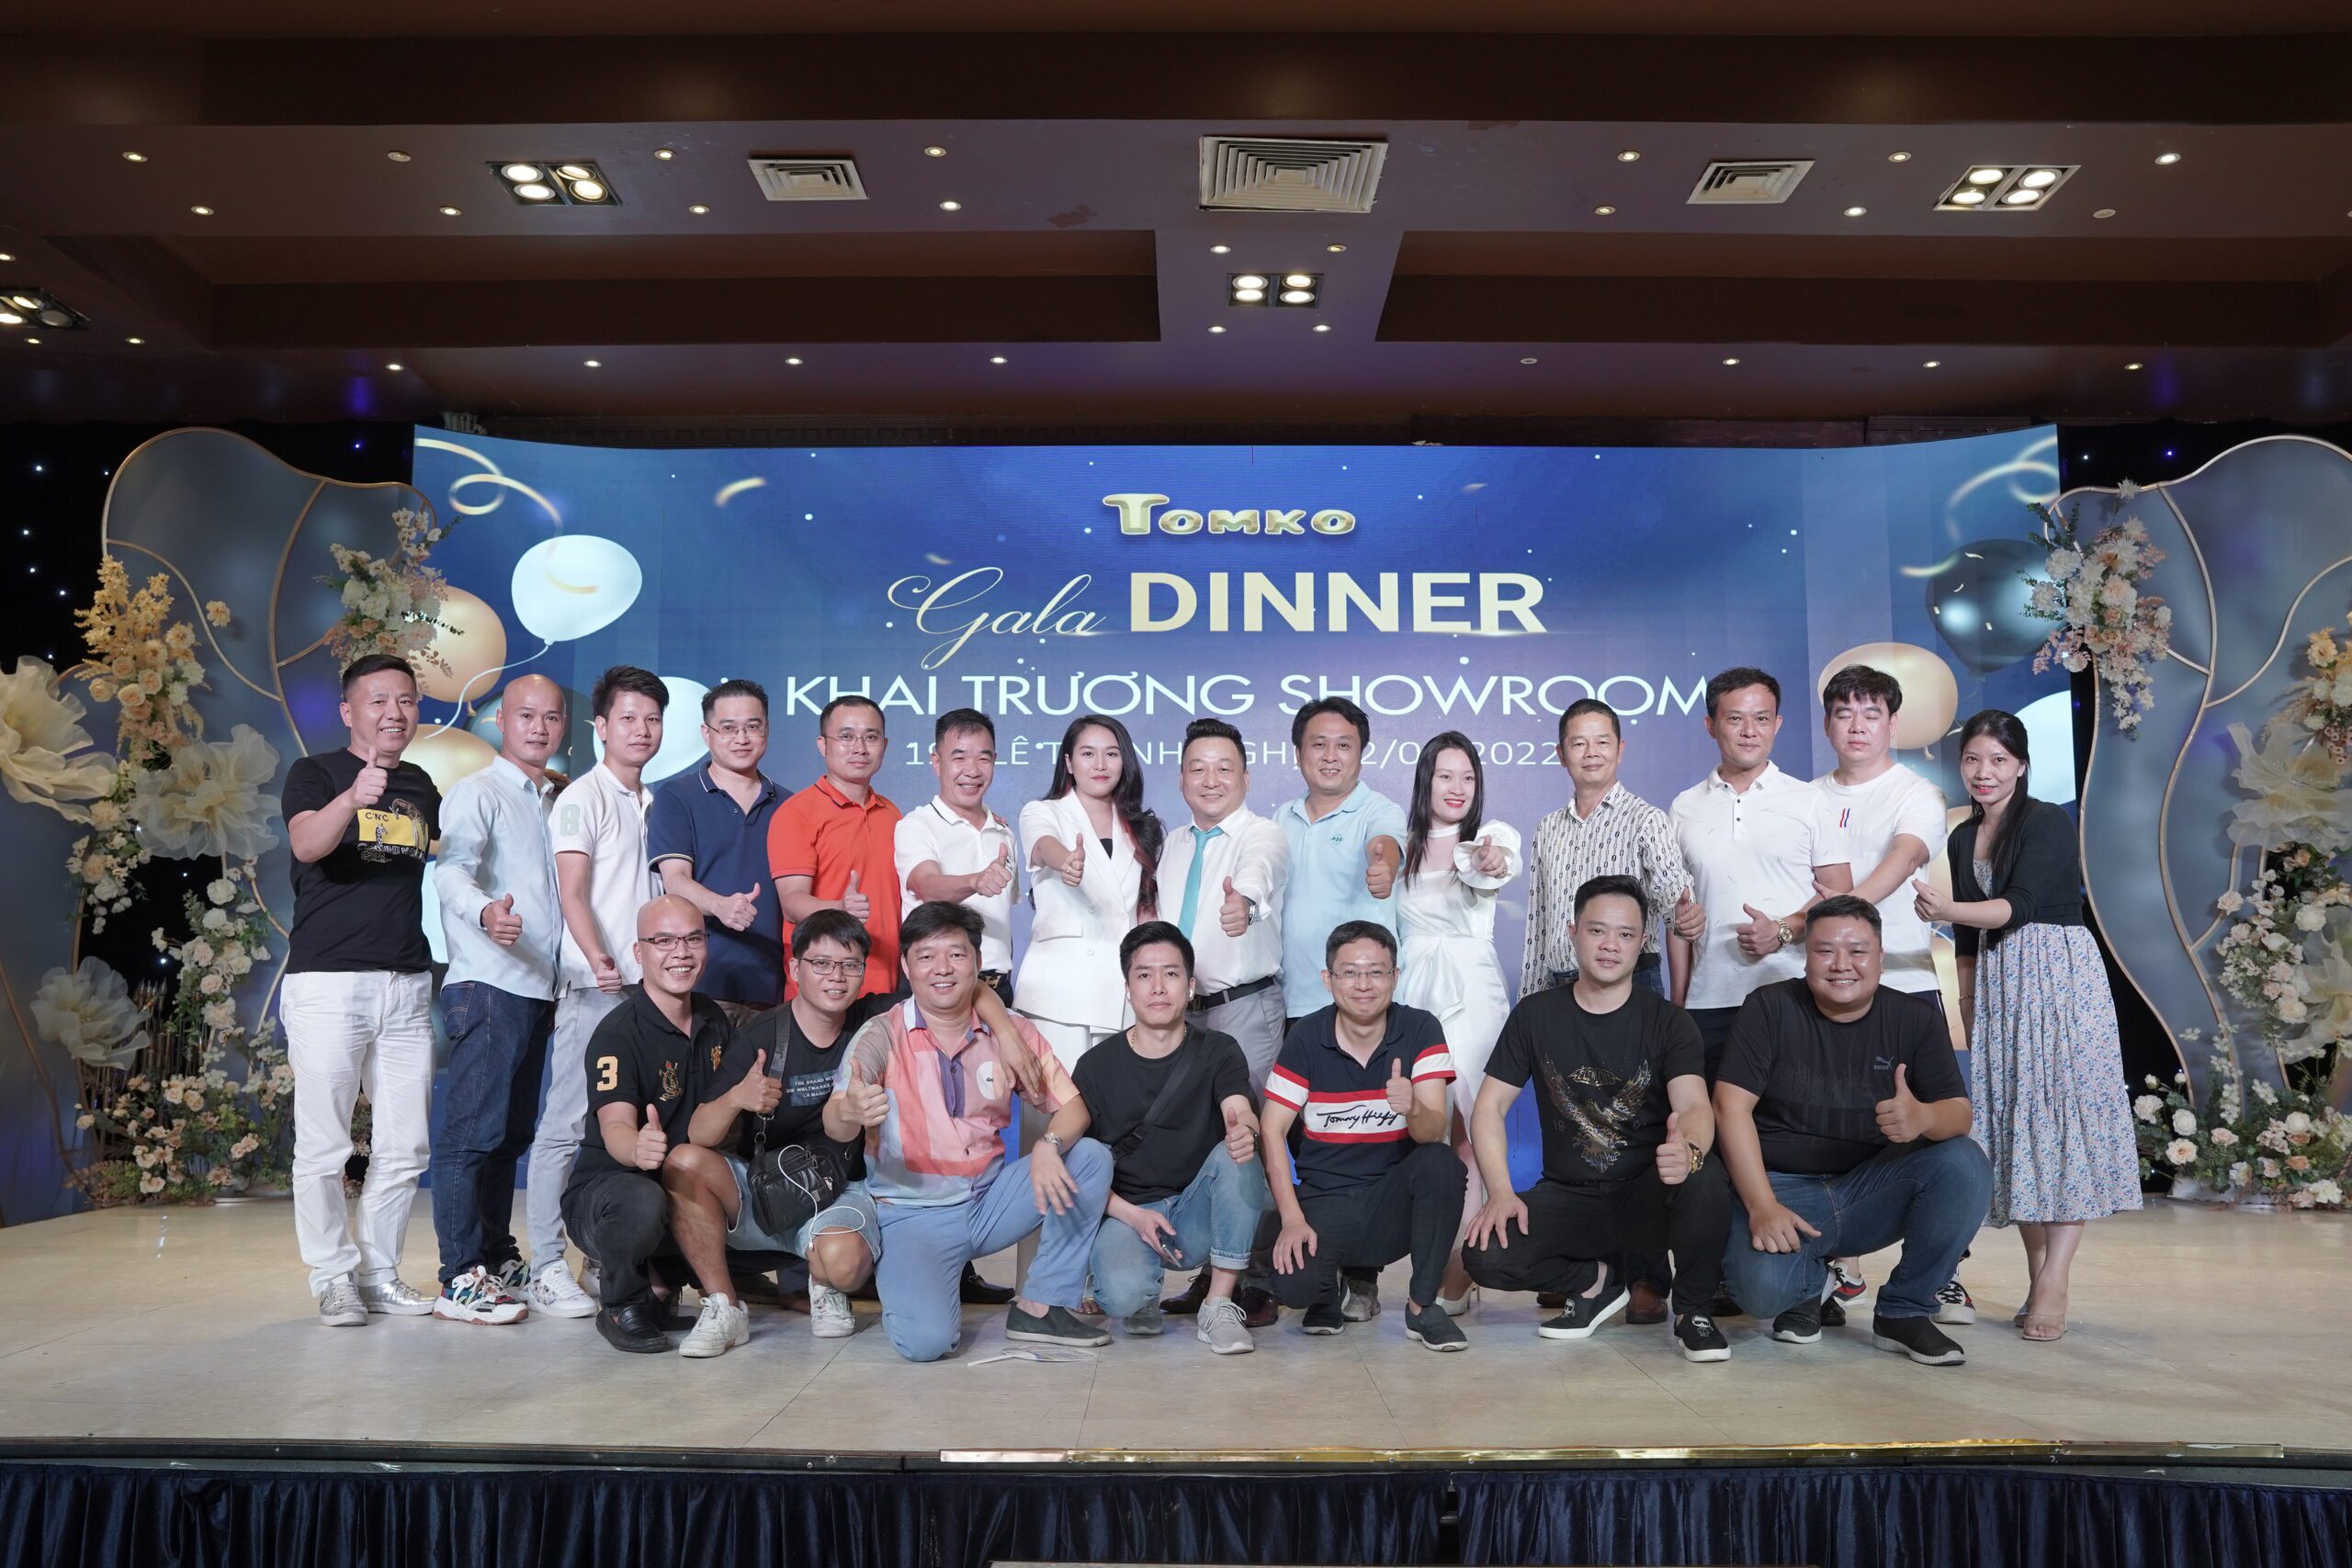 anh gala dinner khai truong showroom tomko 192 le thanh nghi 2